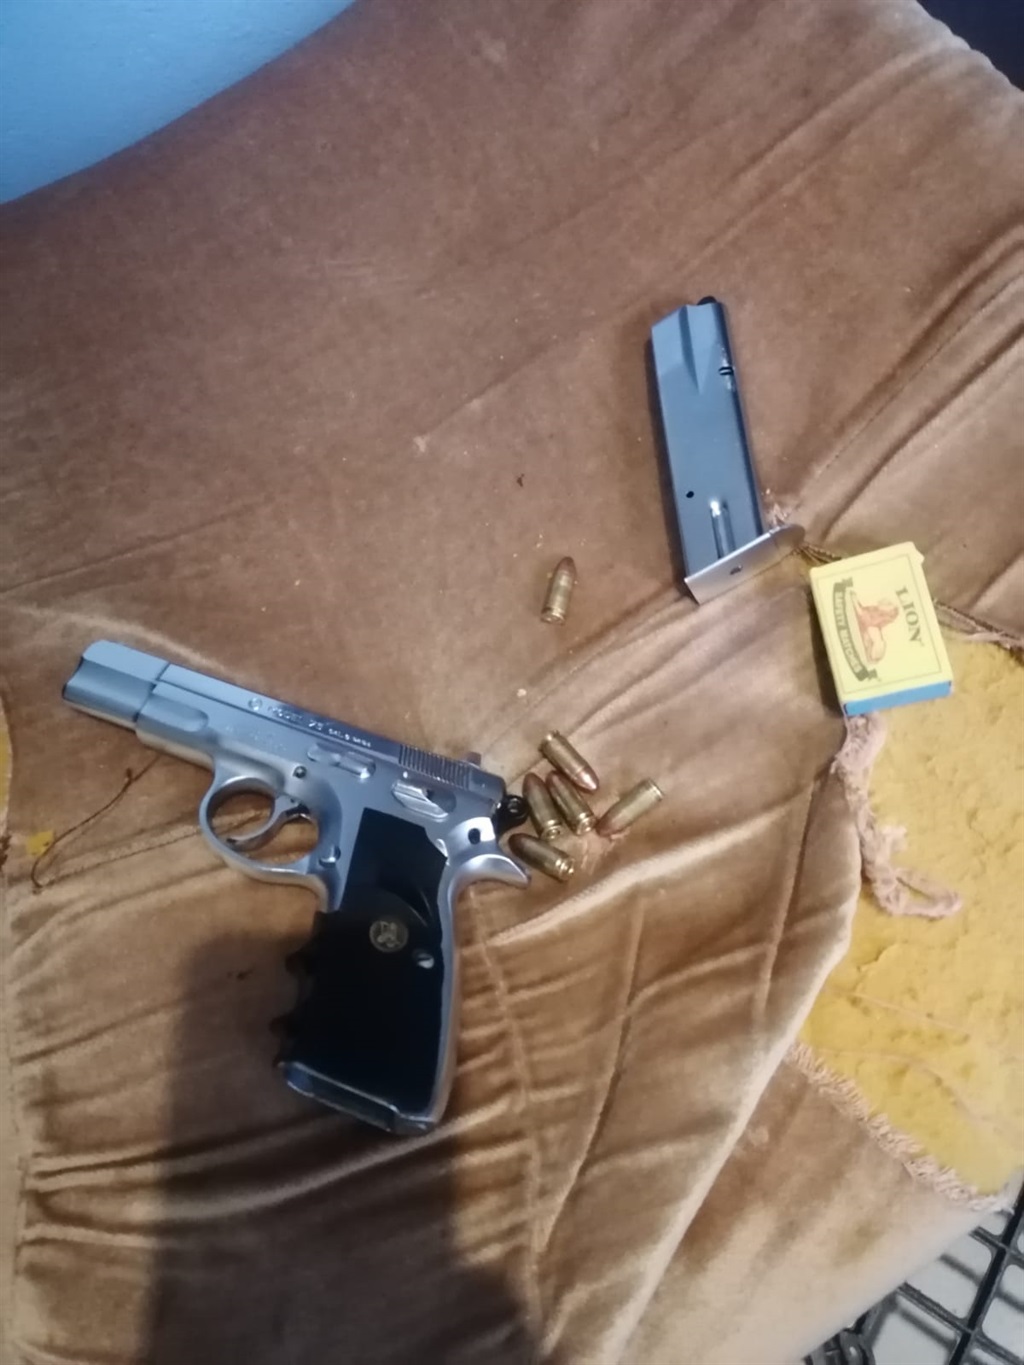 Cops recovered unlicensed firearms during their operations over the weekend.